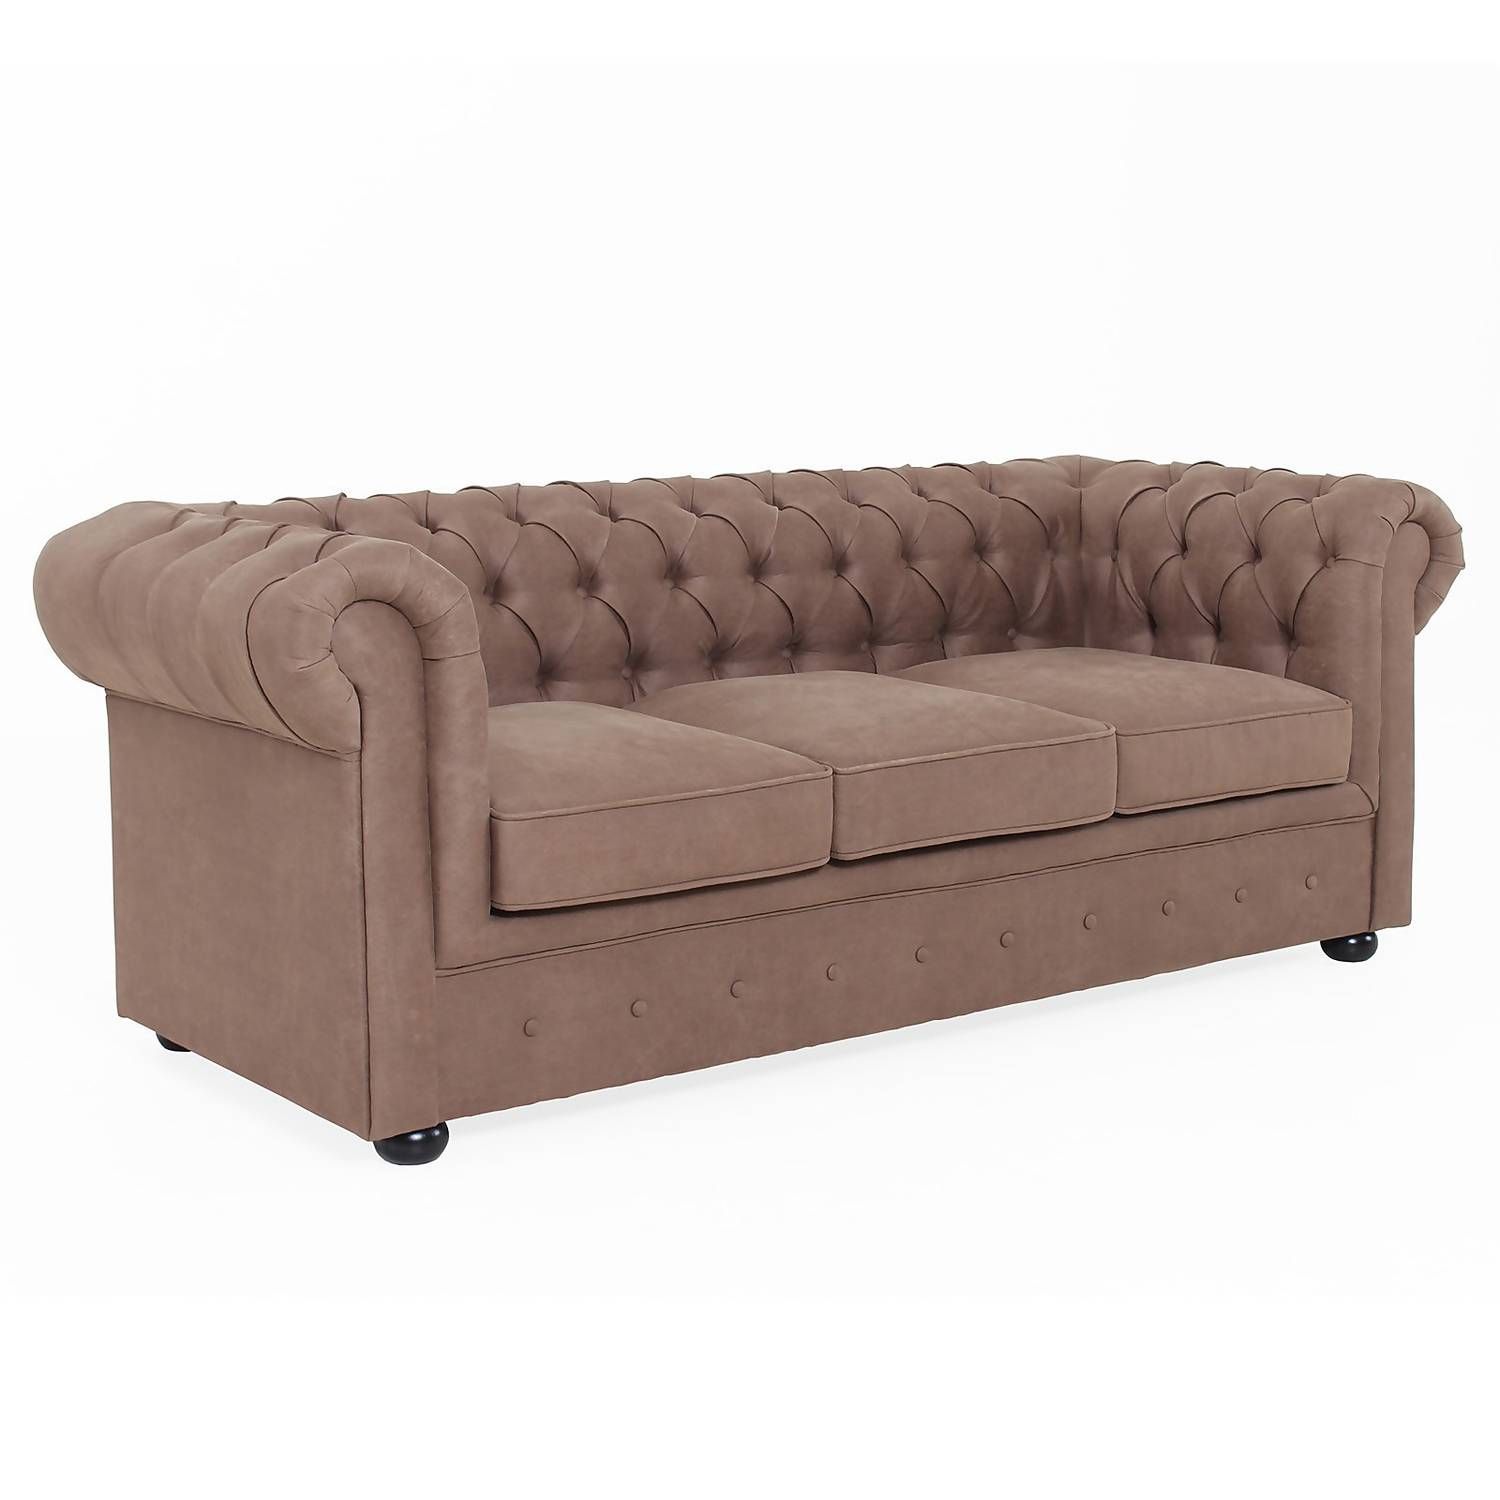 Chesterfield Faux Leather 3 Seater Sofa – Tan | Homebase Regarding Traditional 3 Seater Faux Leather Sofas (View 14 of 15)